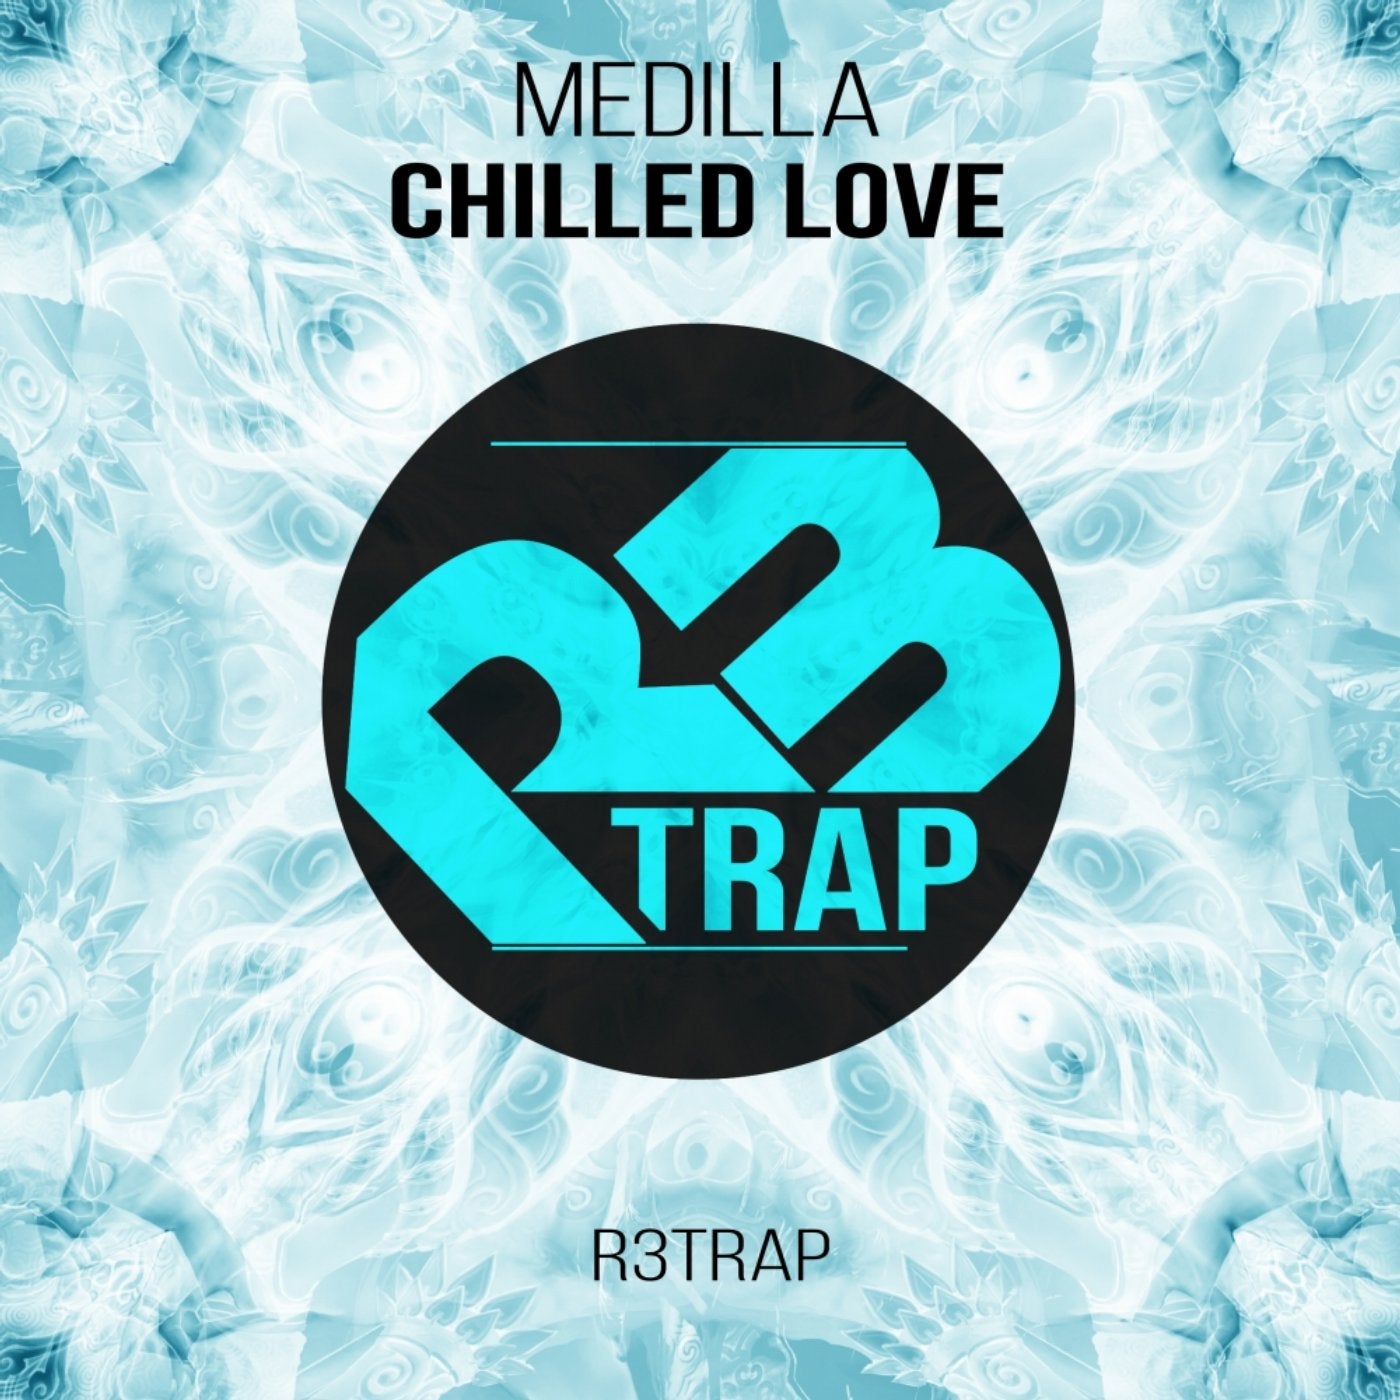 Chill us. Медилла. Chilled. Chill Love. Annzy field of Flowers Original Mix.